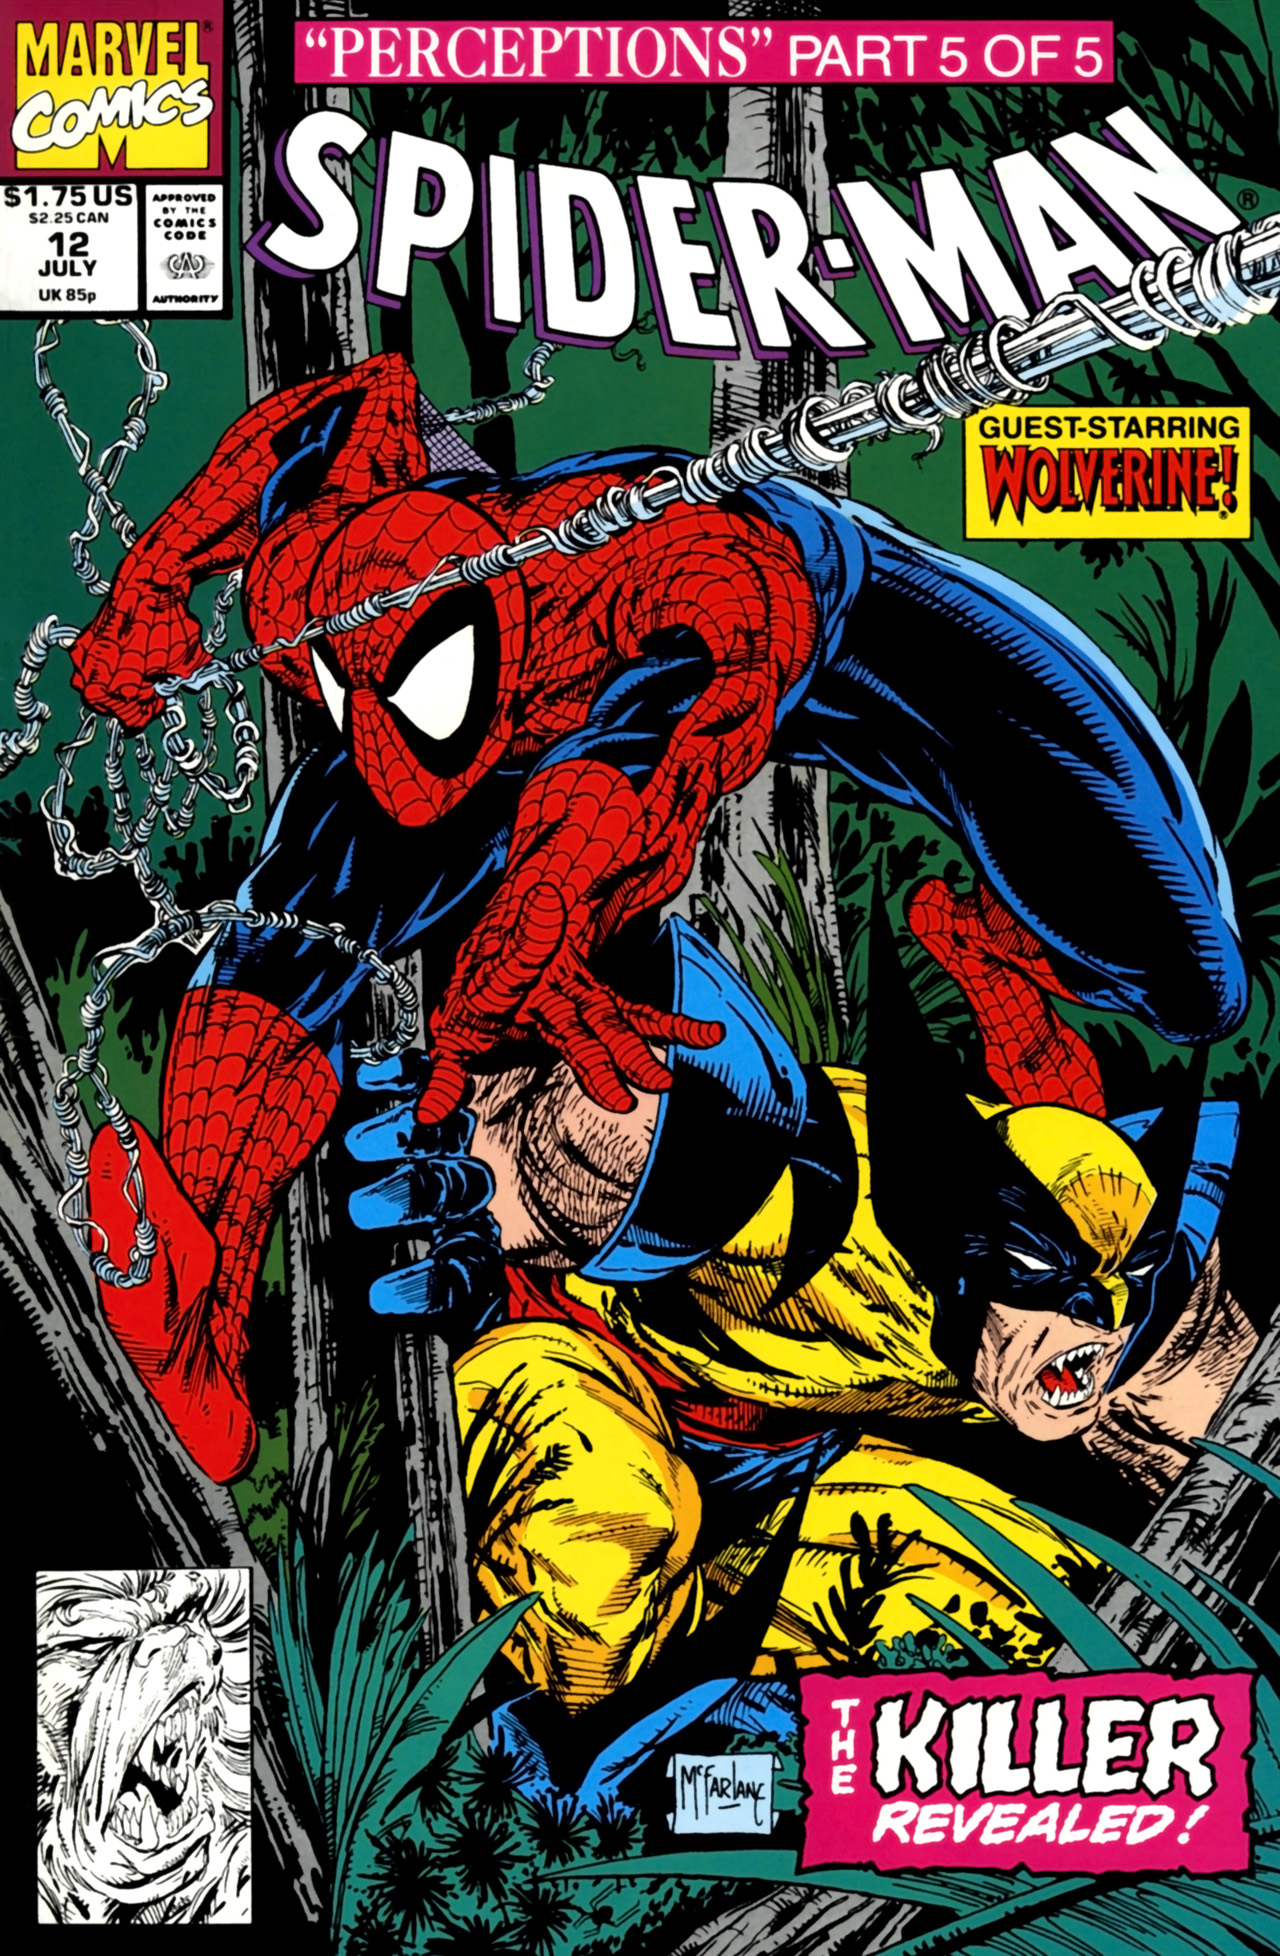 Read online Spider-Man (1990) comic -  Issue #12 - Perceptions Part 5 of 5 - 1